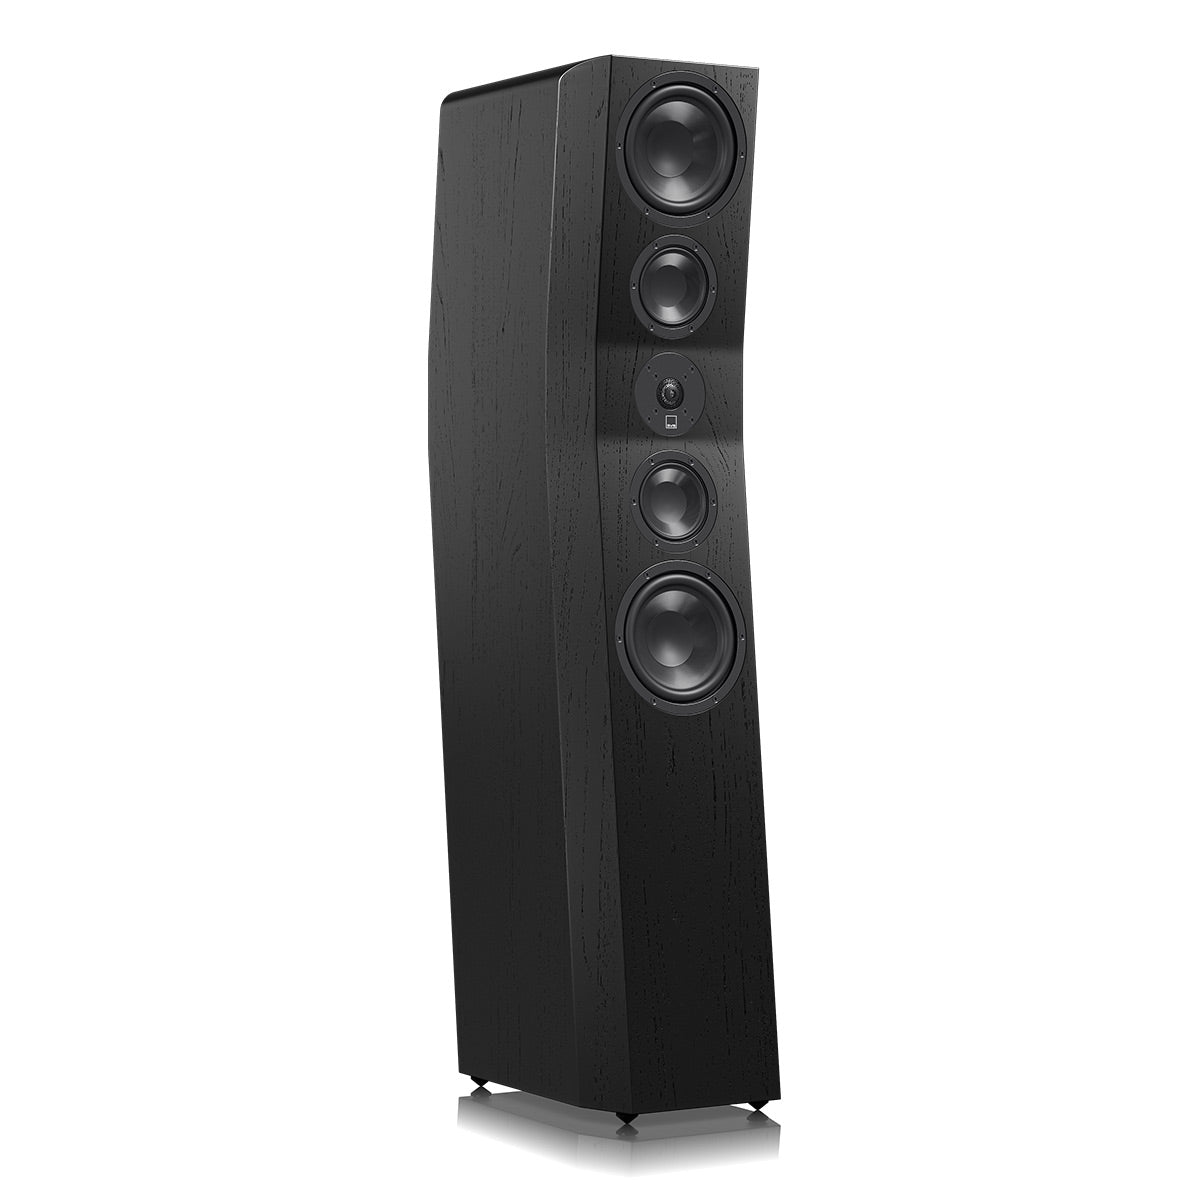 Photos - Speakers SVS Ultra Evolution Titan 3-Way Tower Speaker with Quad 6.5" Woofers - Eac 